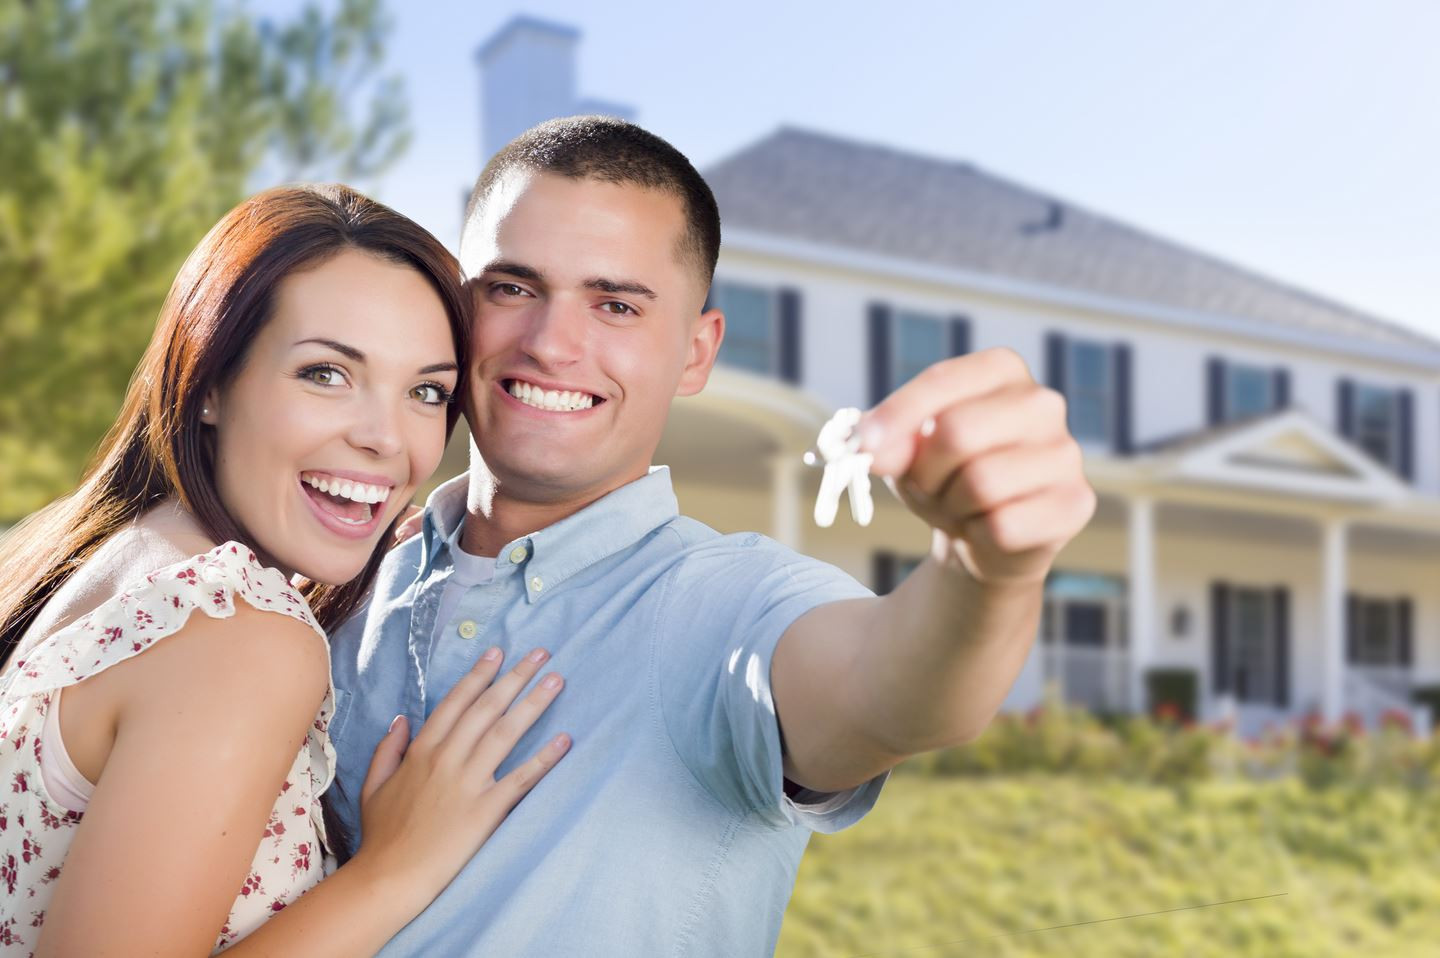 first-time homebuyers standing in front of new home after following helpful tips during their search and mortgage process